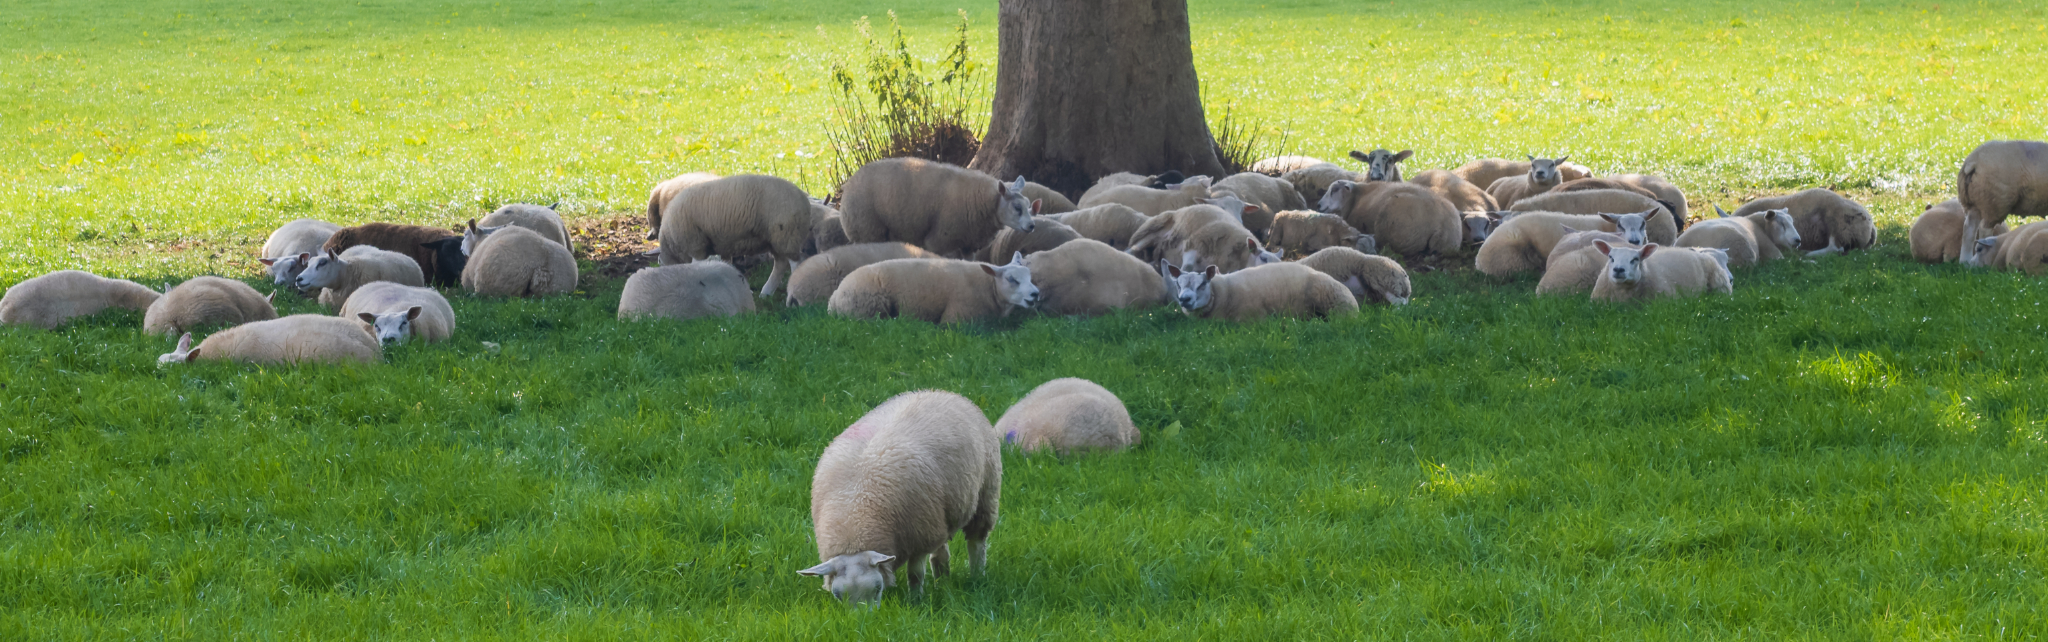 lambs-resting-under-trees-south-tyne